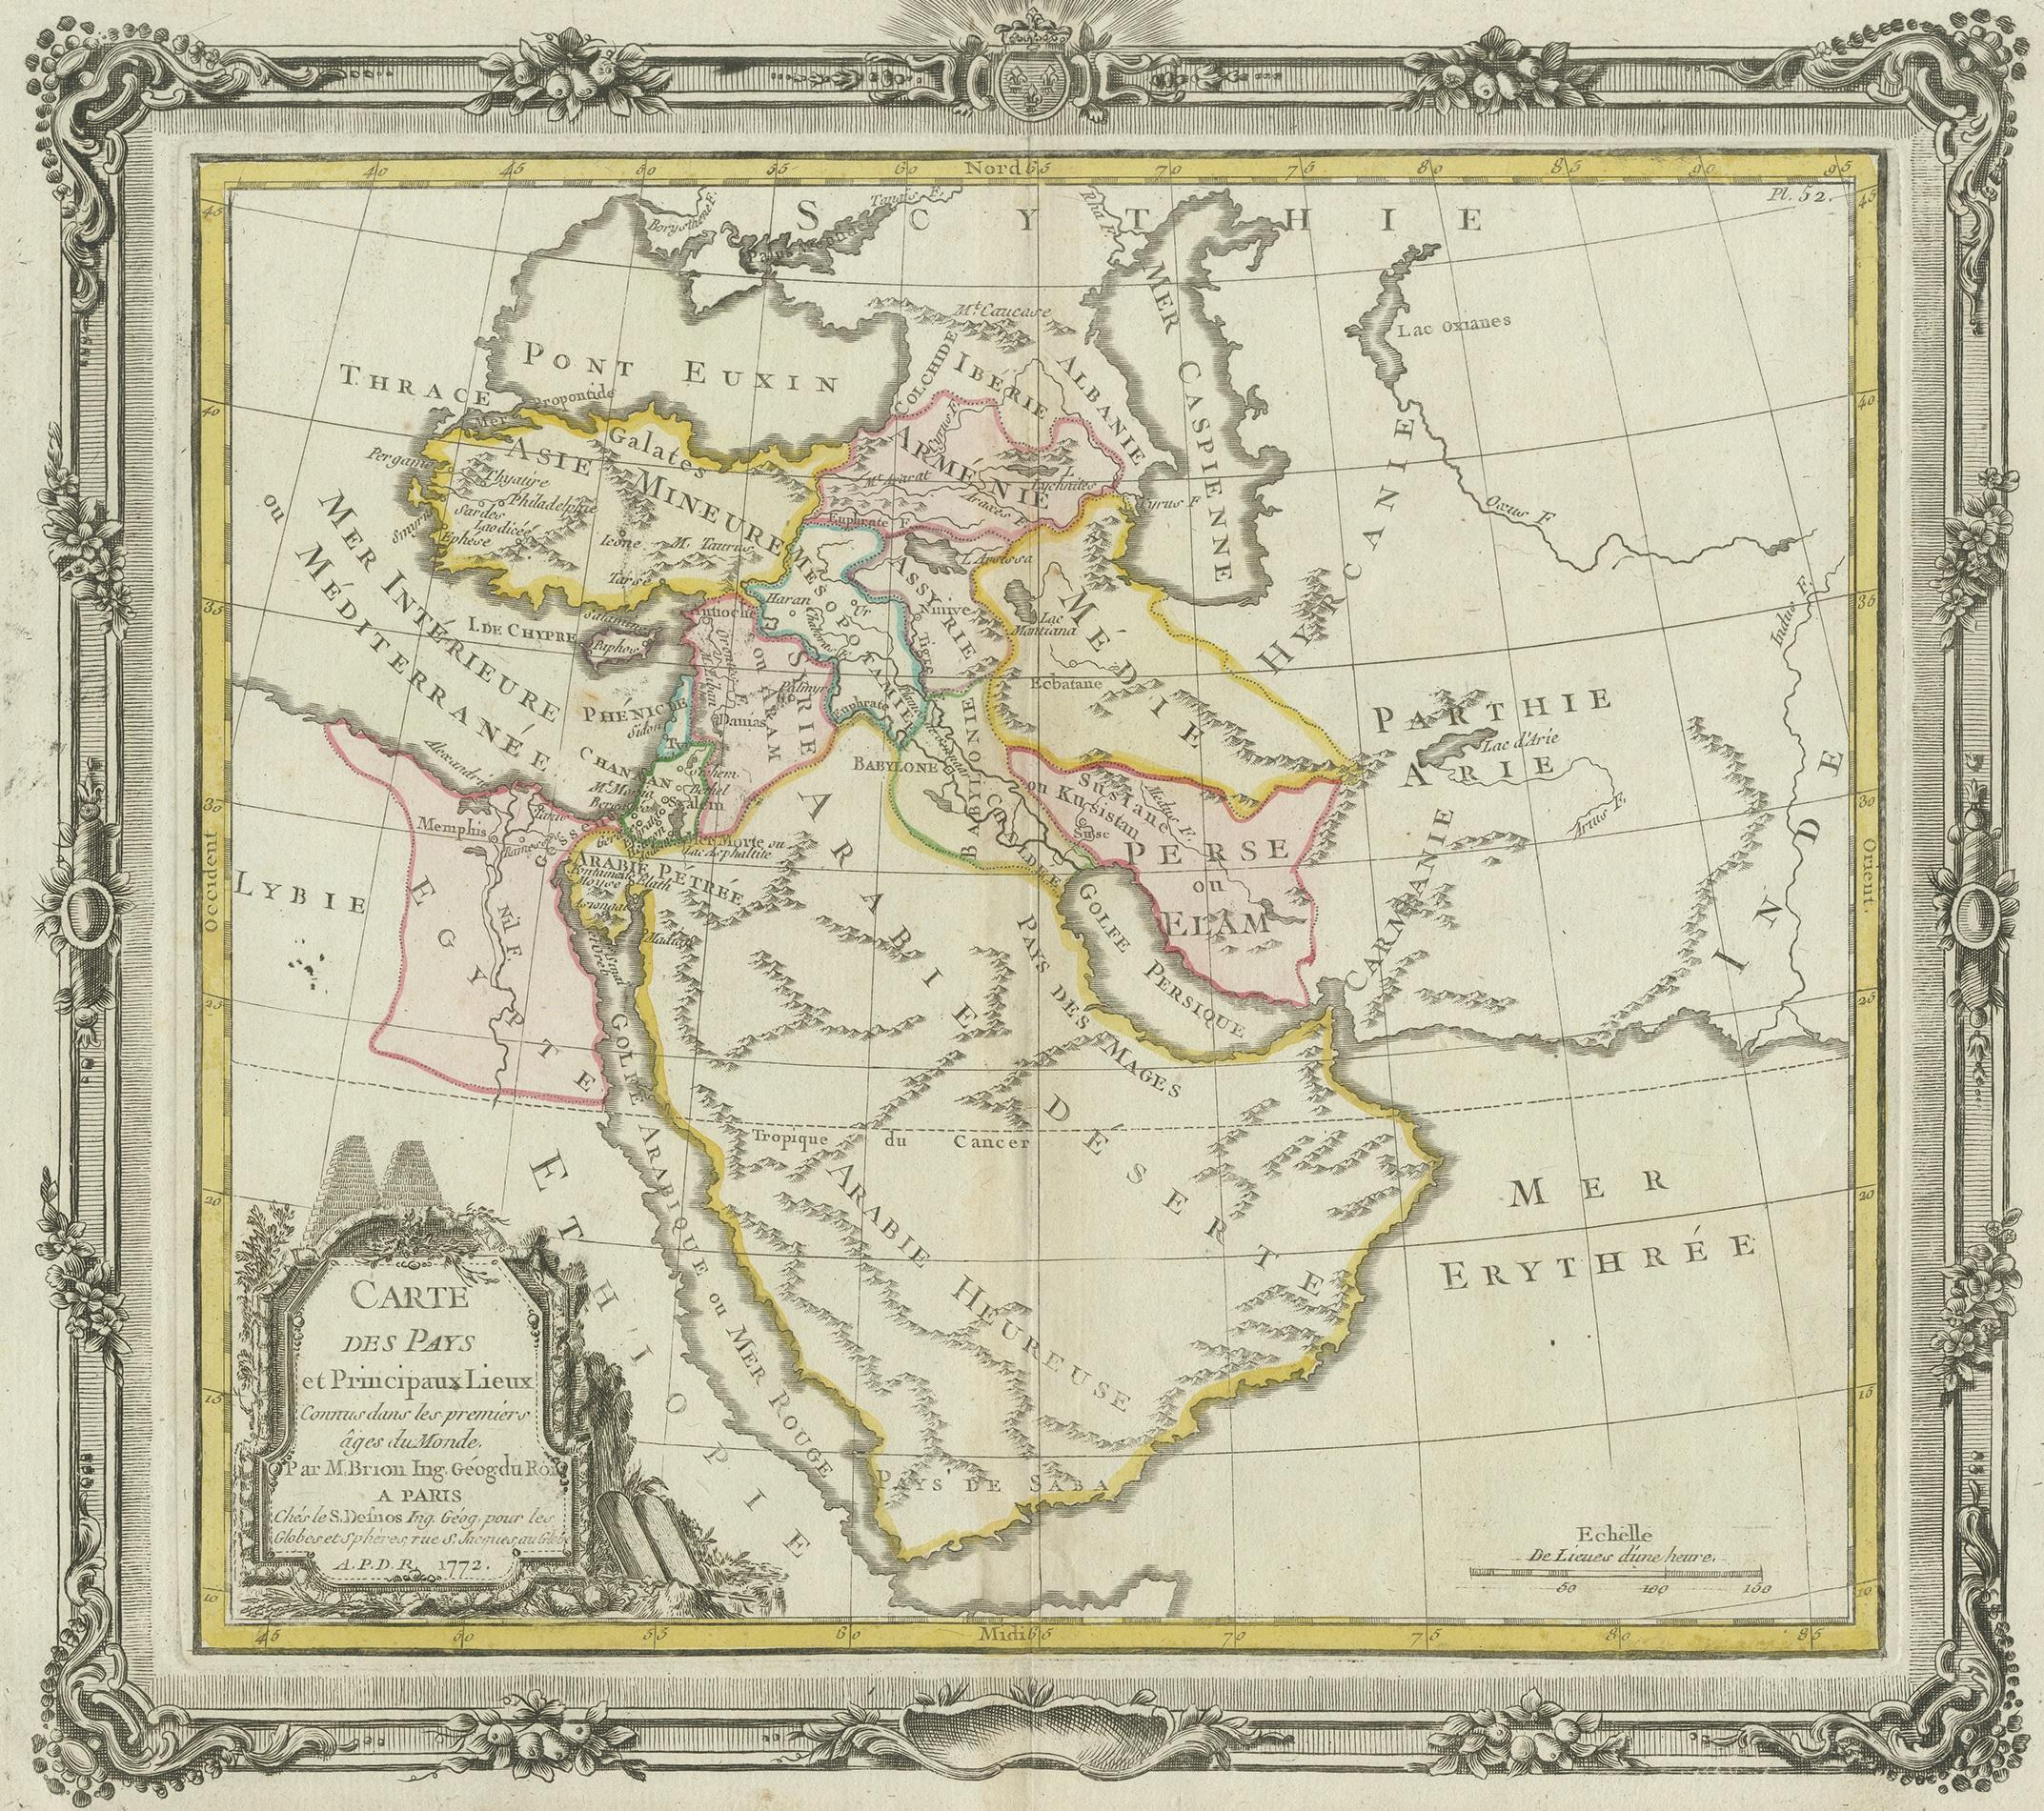 Antique map titled 'Carte des Pays et Principaux Lieux (..)'. Original antique map of Middle East, extending to the Red Sea, Egypt, the Eastern Mediterranean, Black Sea, Caspian Sea and the Indian Ocean. Includes decorative engraved title cartouche